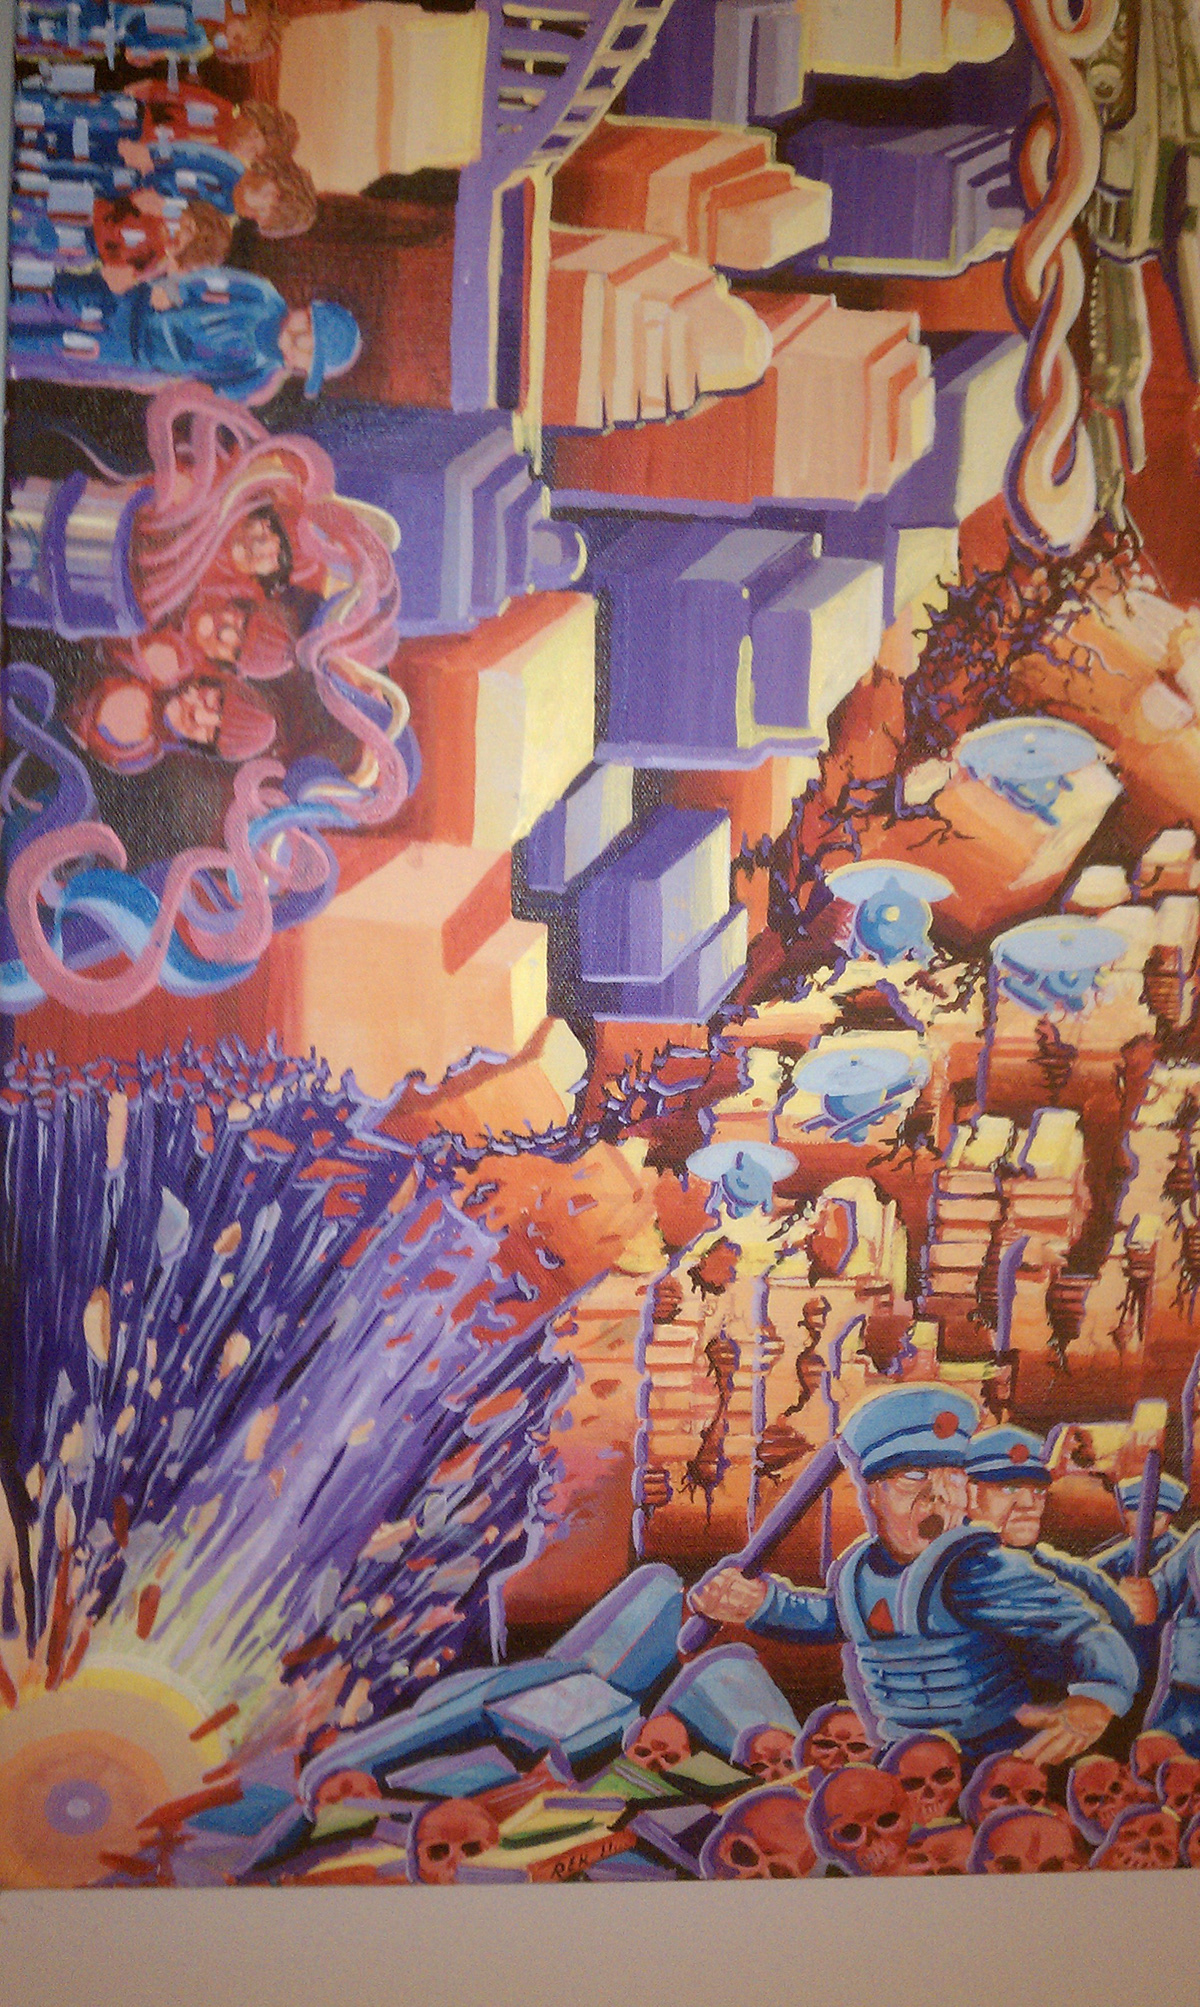 creative painting   acrylic robertkrumholz   buildings cityscape imaginary dreams Flying colorful psychedelic DMT